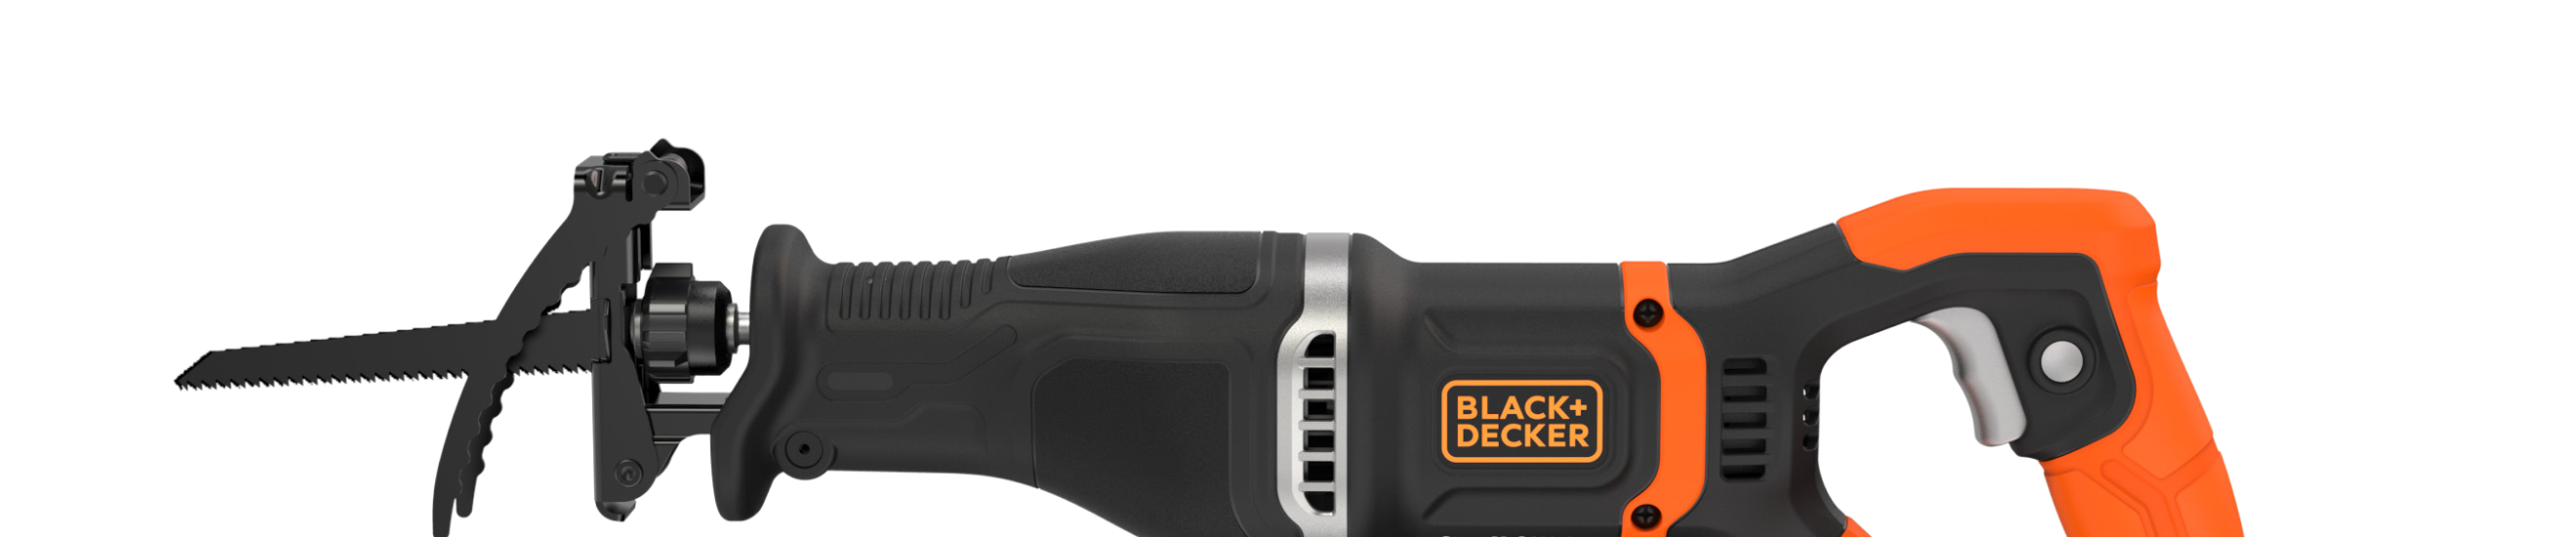 beyond by BLACK+DECKER Electric Pruning Saw with Branch Holder - BES302KAPB